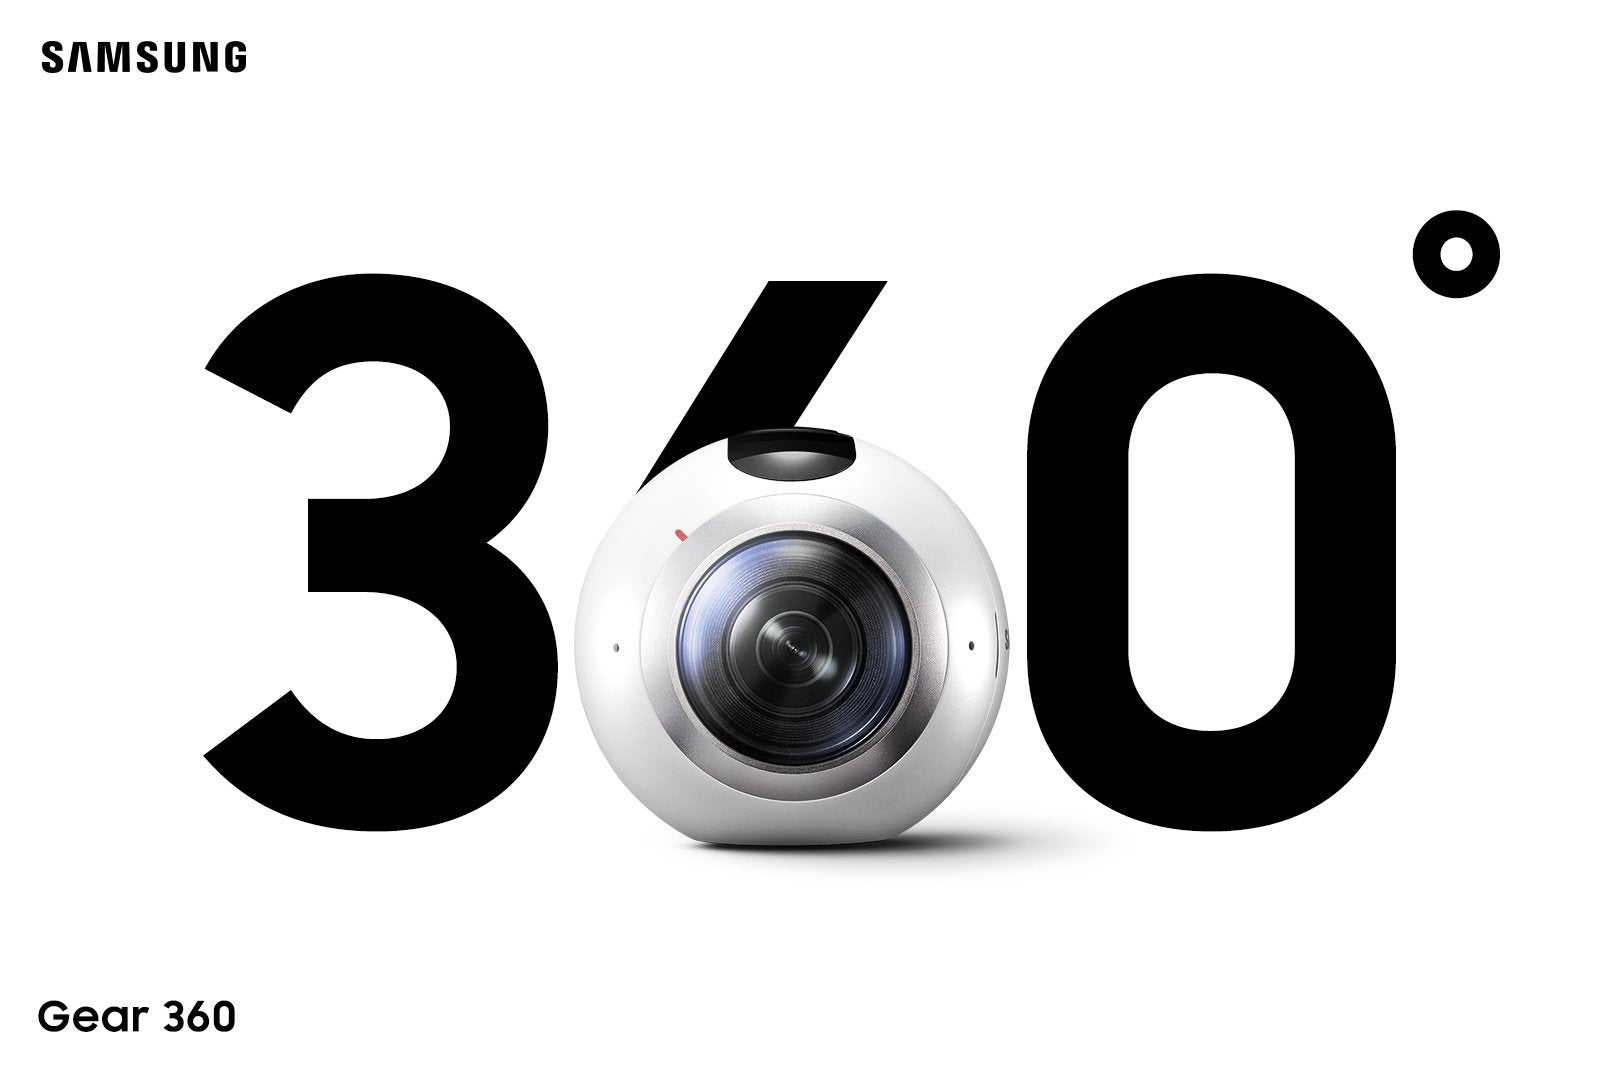 Samsung shows the intricate inner workings of its Gear 360 panoramic smart camera